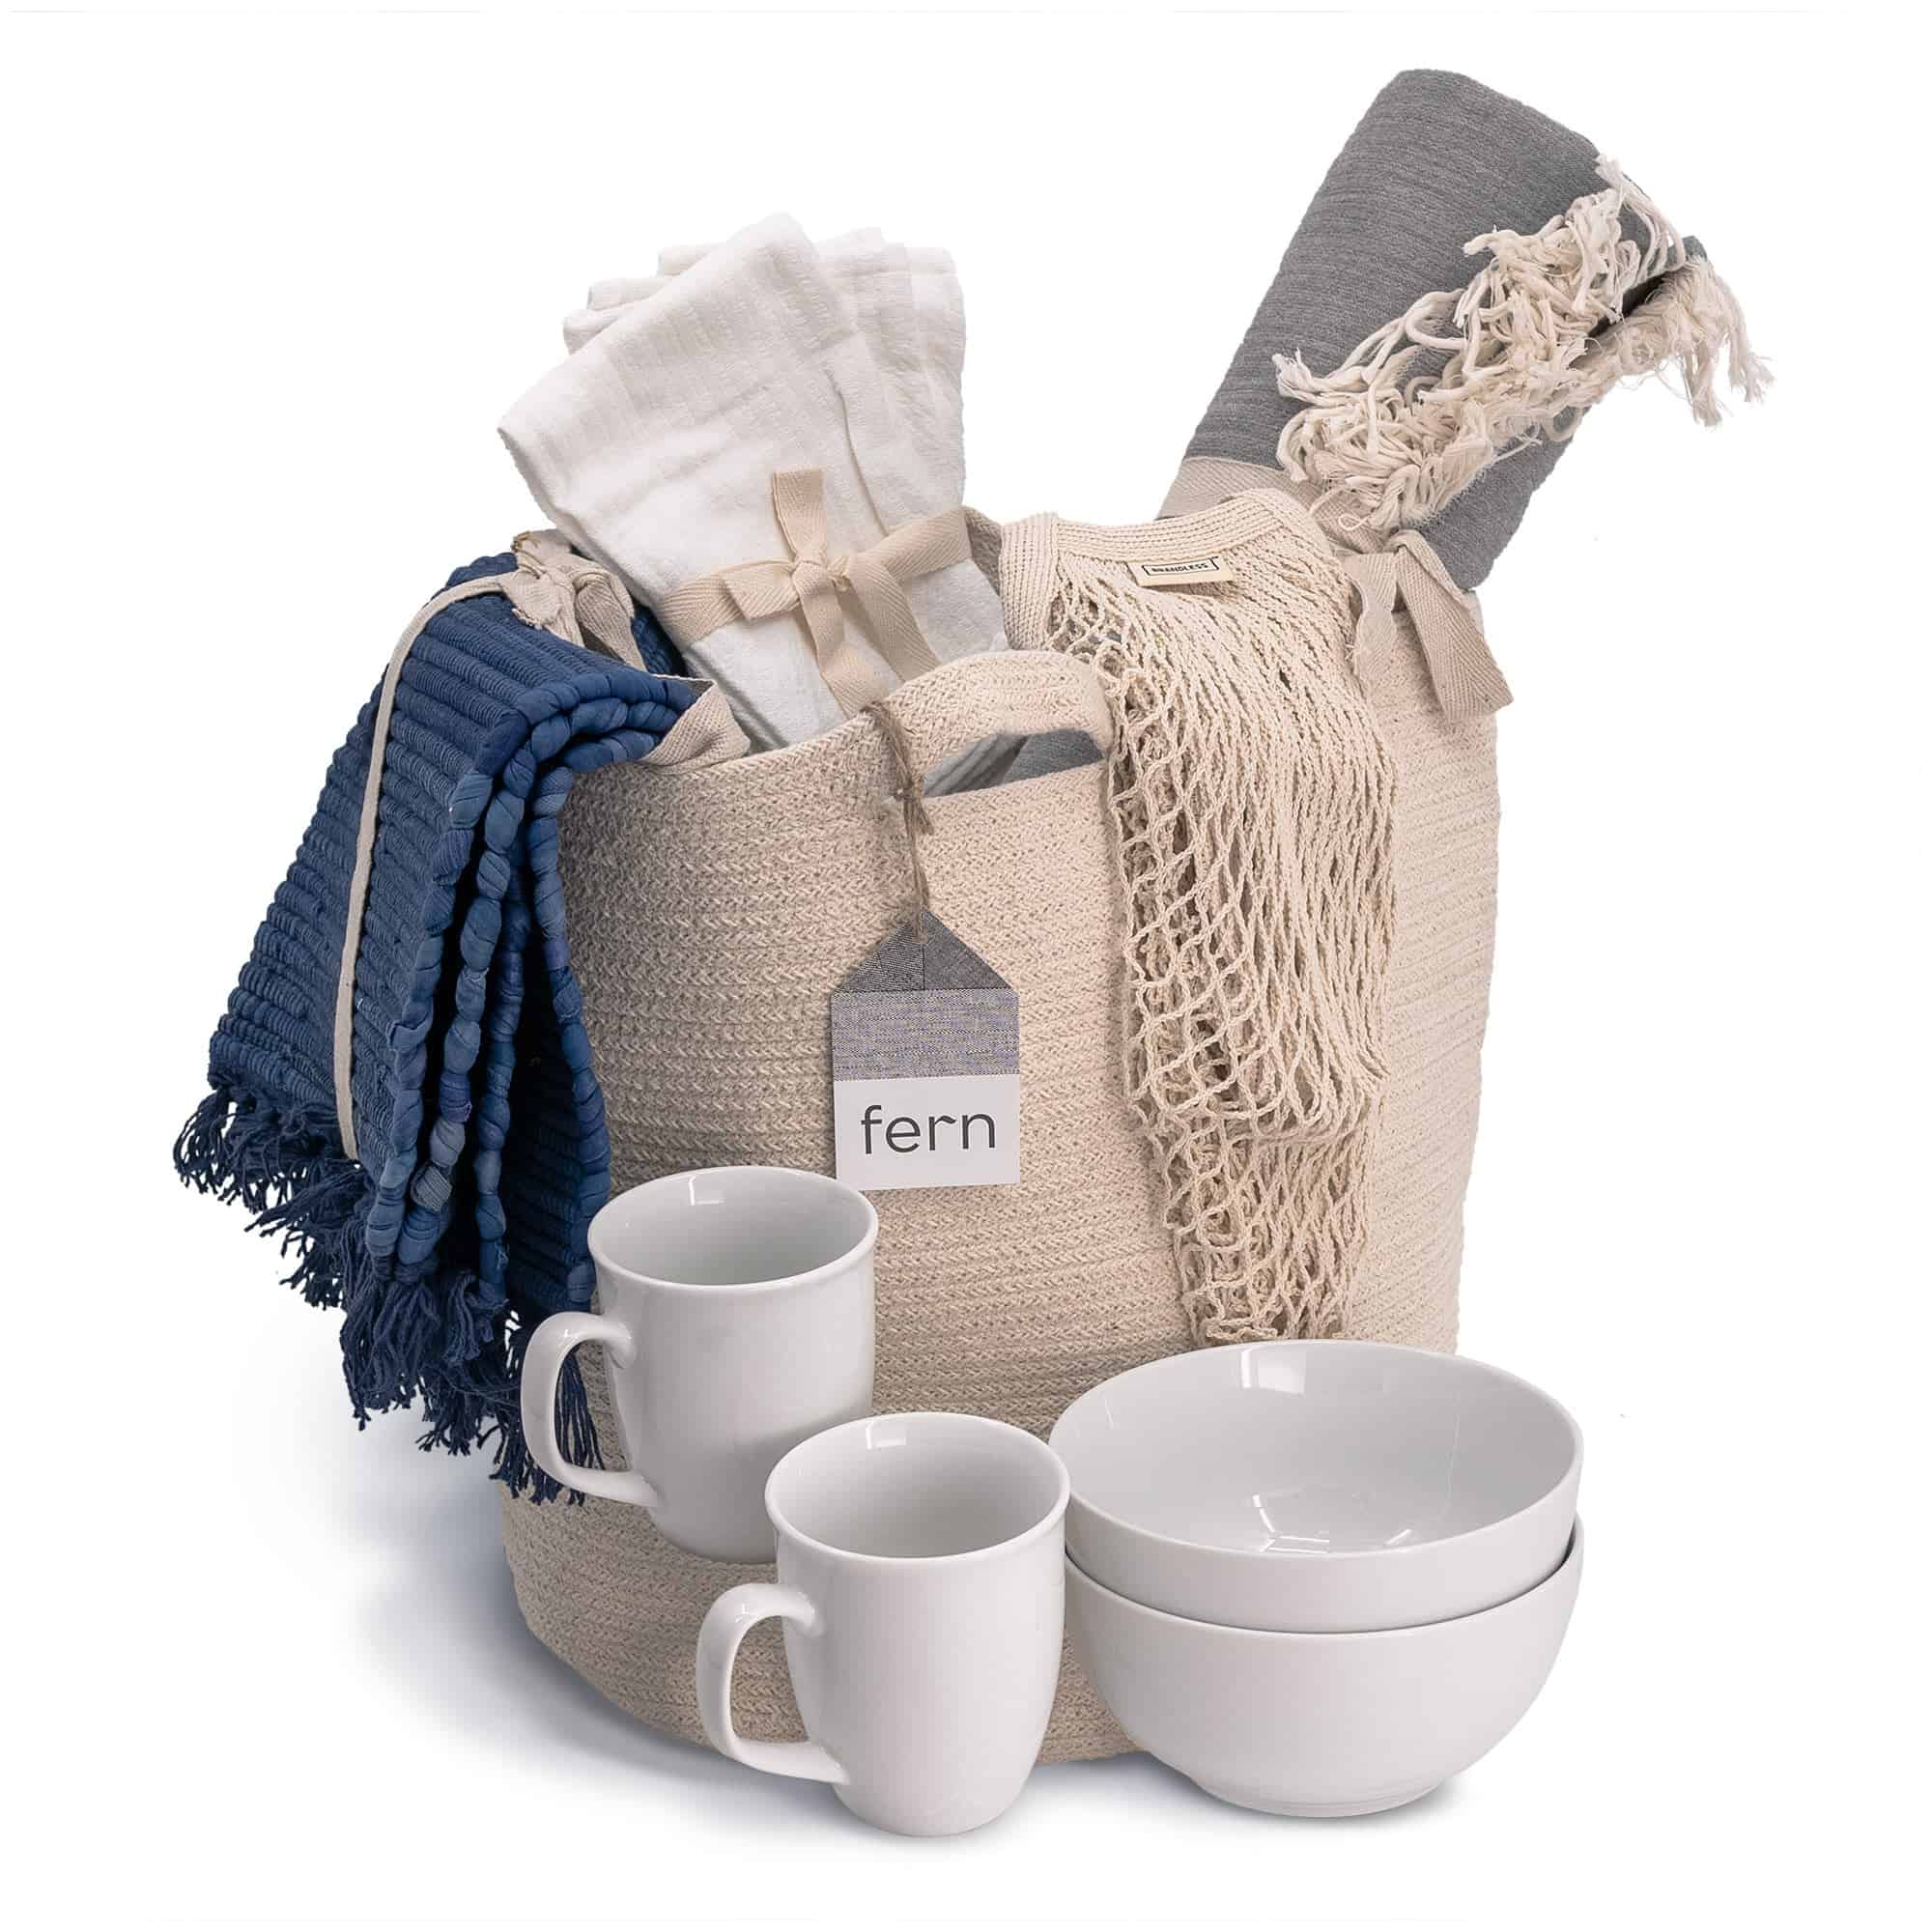 Comforts of Home Bundle by Brandless